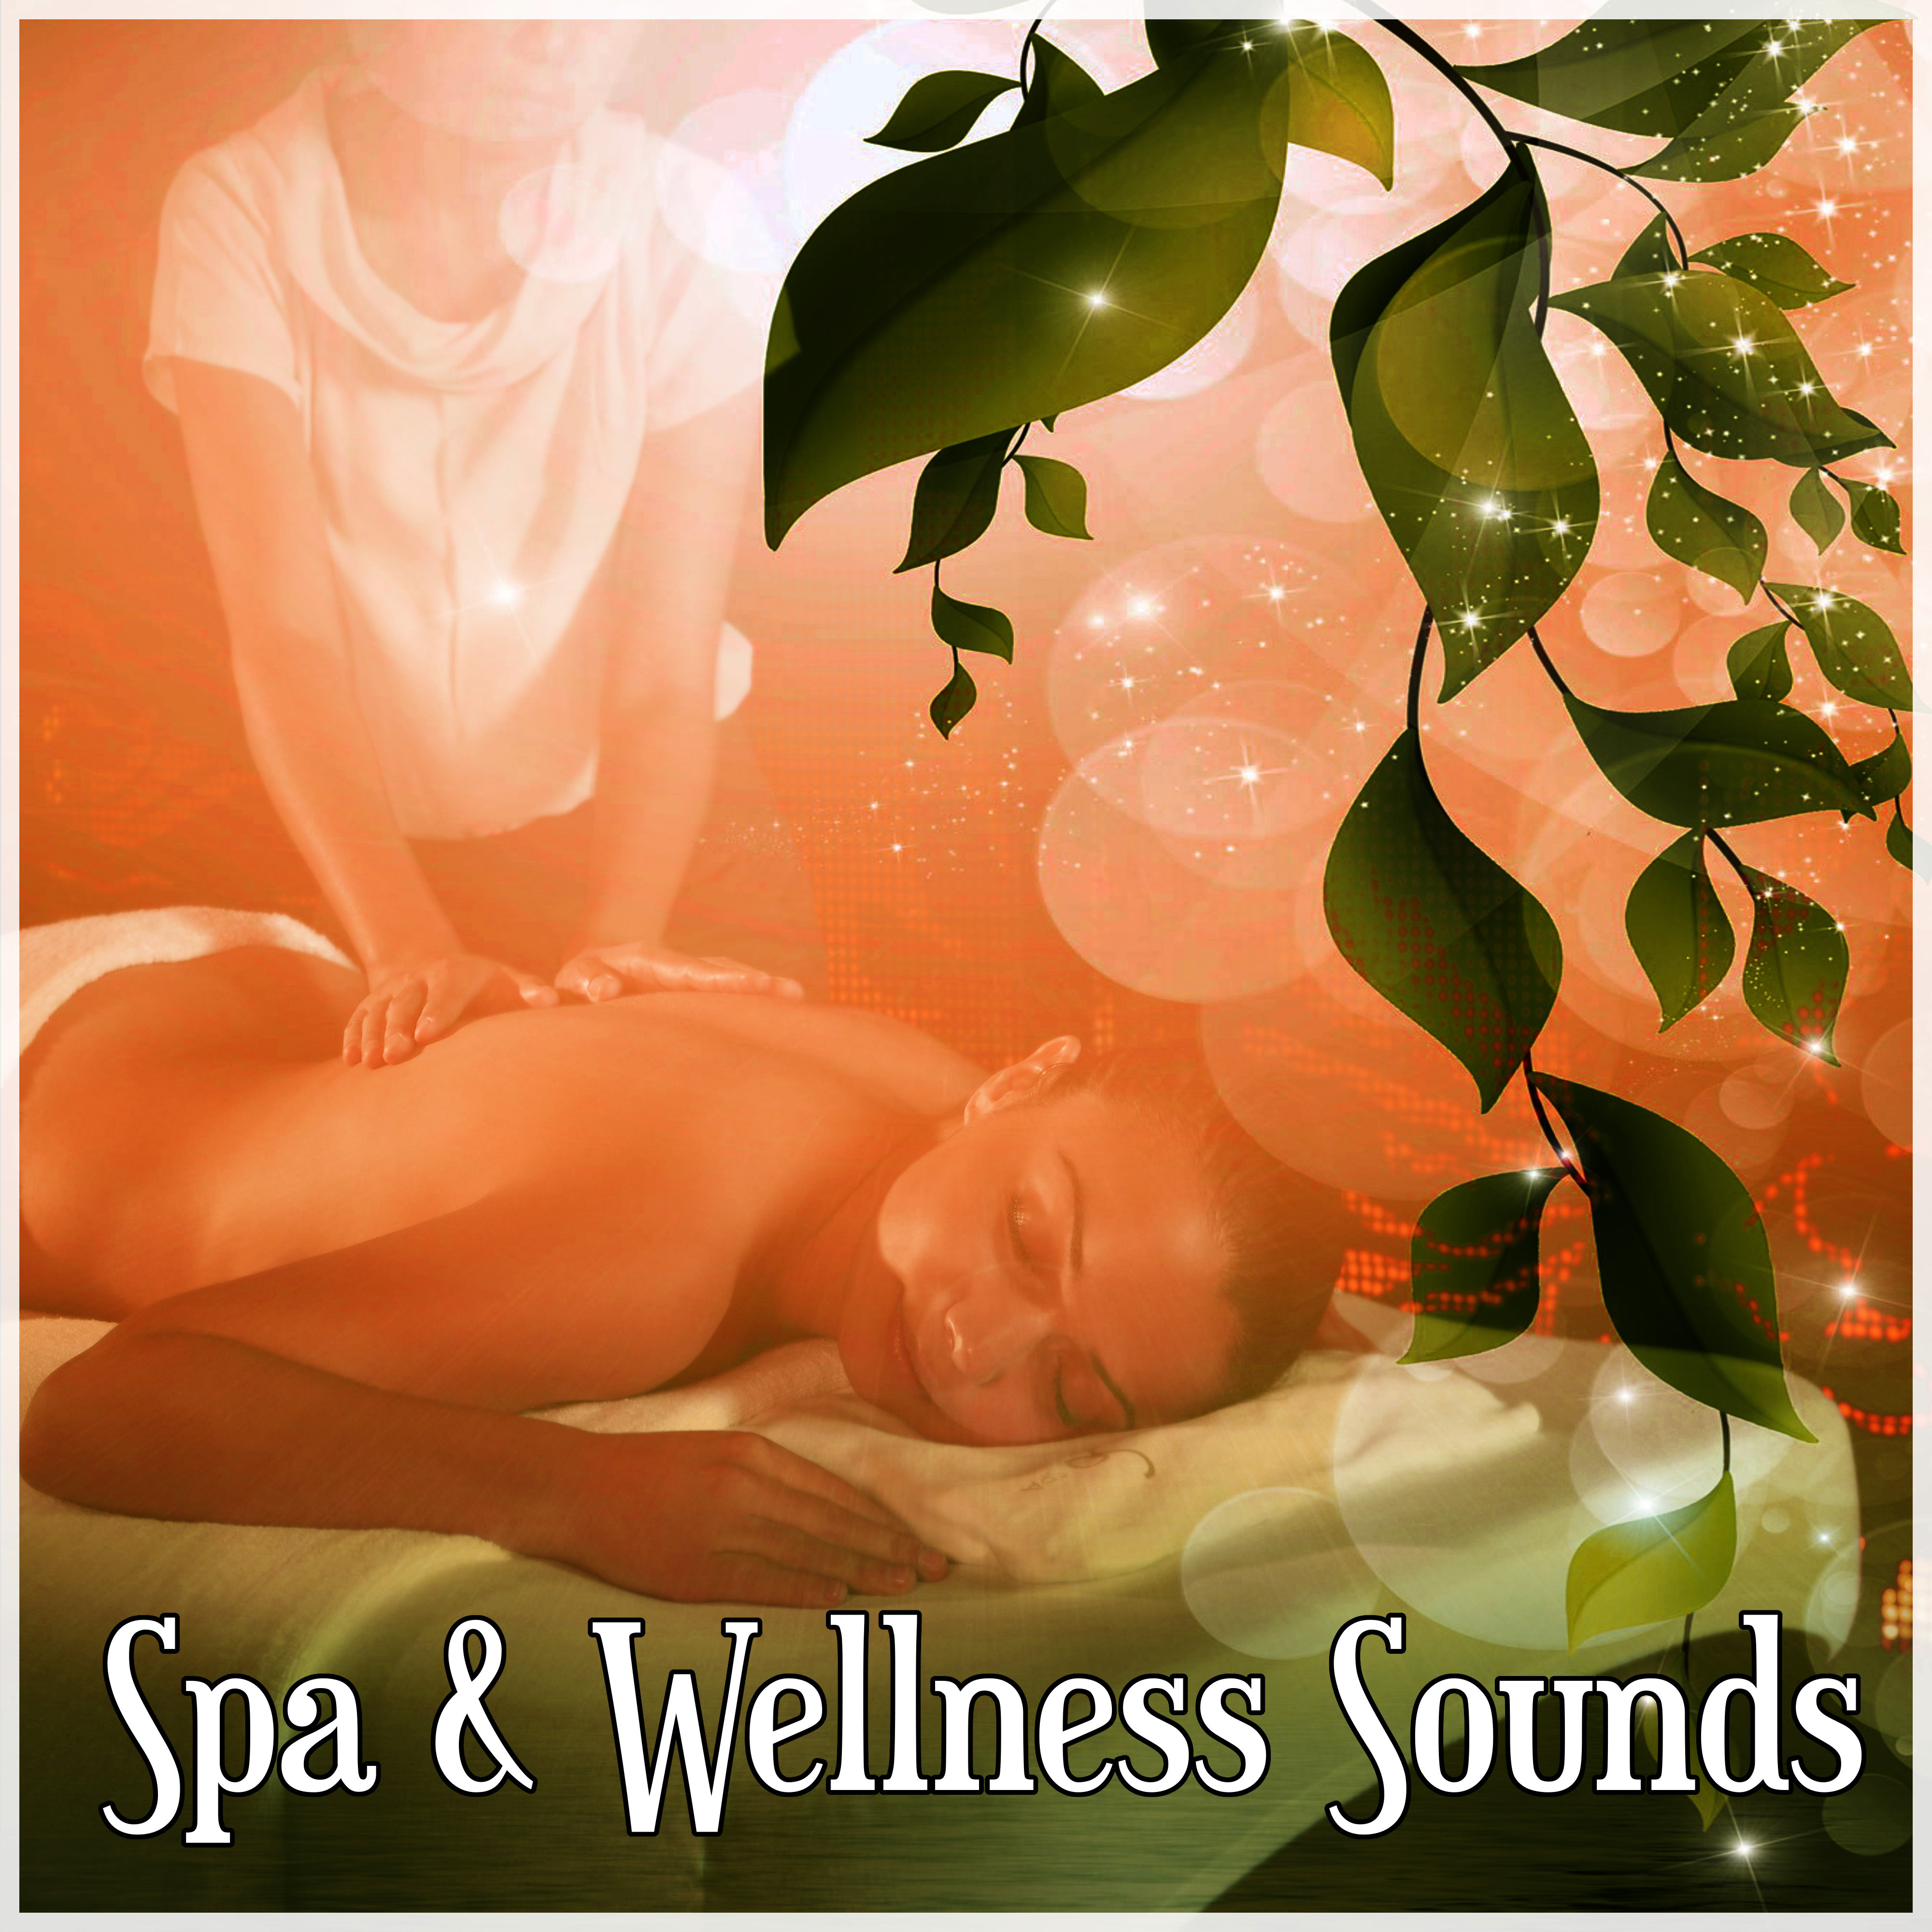 Spa  Wellness Sounds  Best Calming Nature Sounds for Pure Relax, Relief Stress  Feel Beaty  Happy